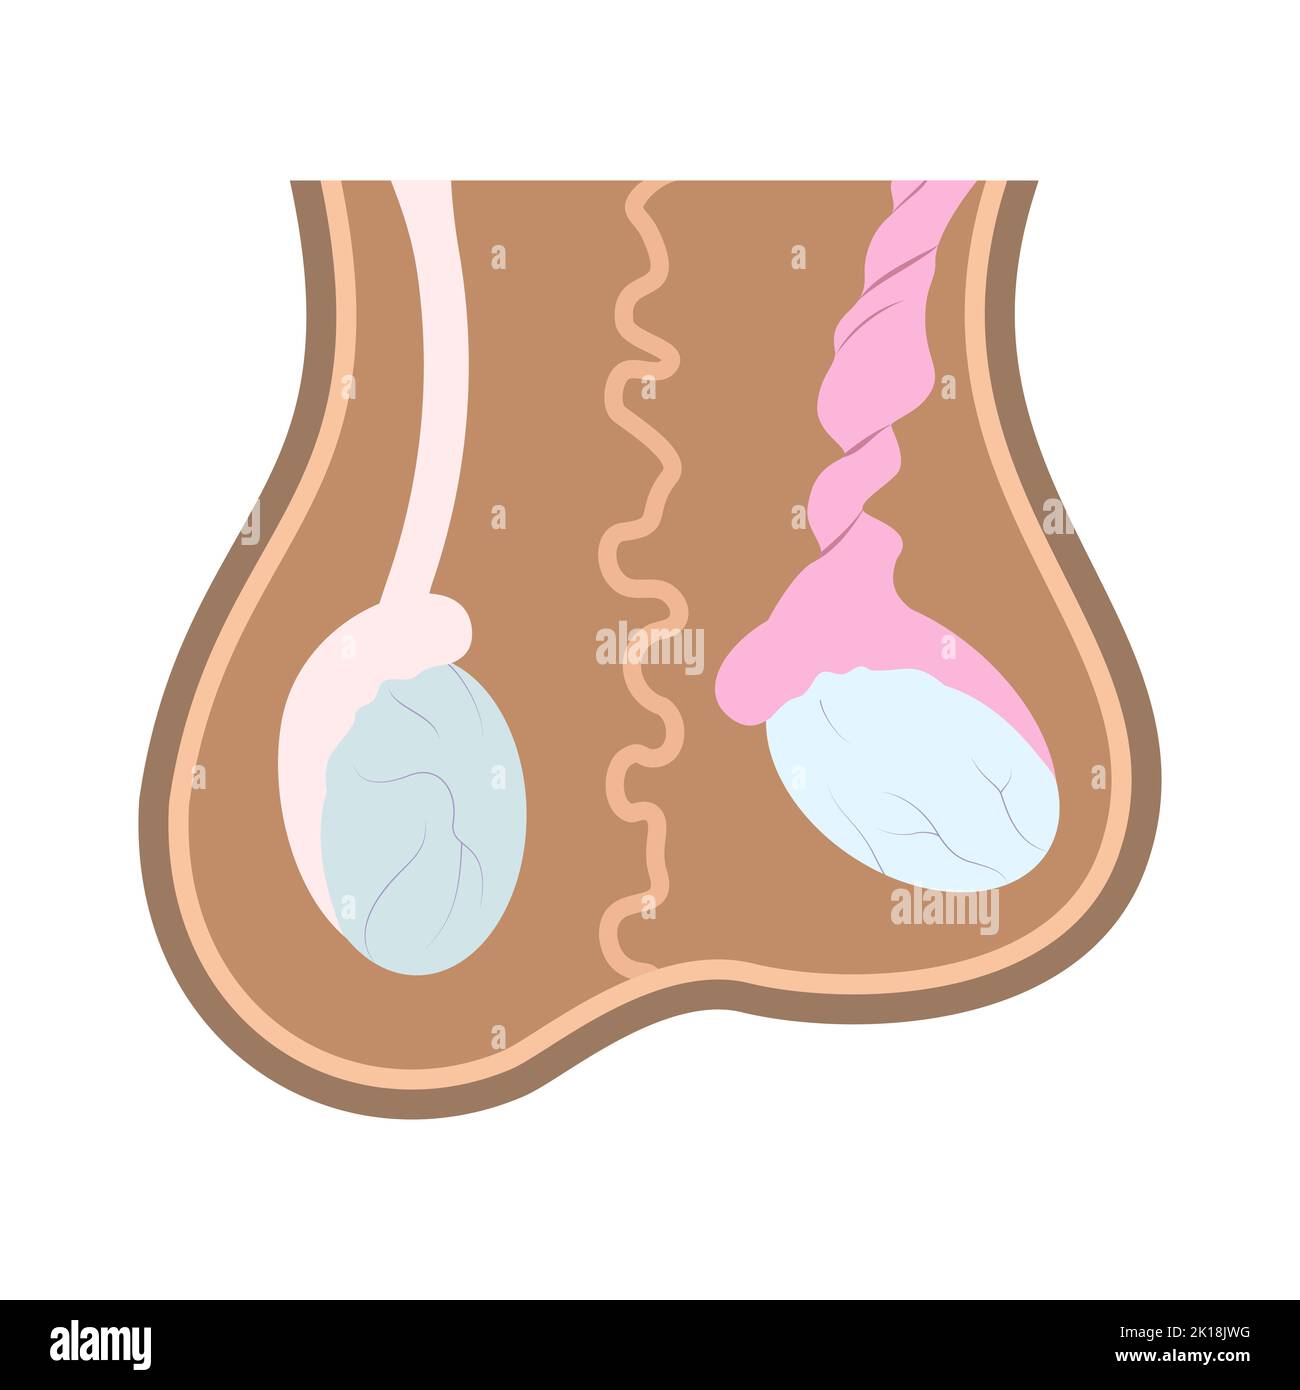 Illustration of normal testicle and testicle torsion in scrotum. Medical chart of reproductive organ anatomy. Stock Vector